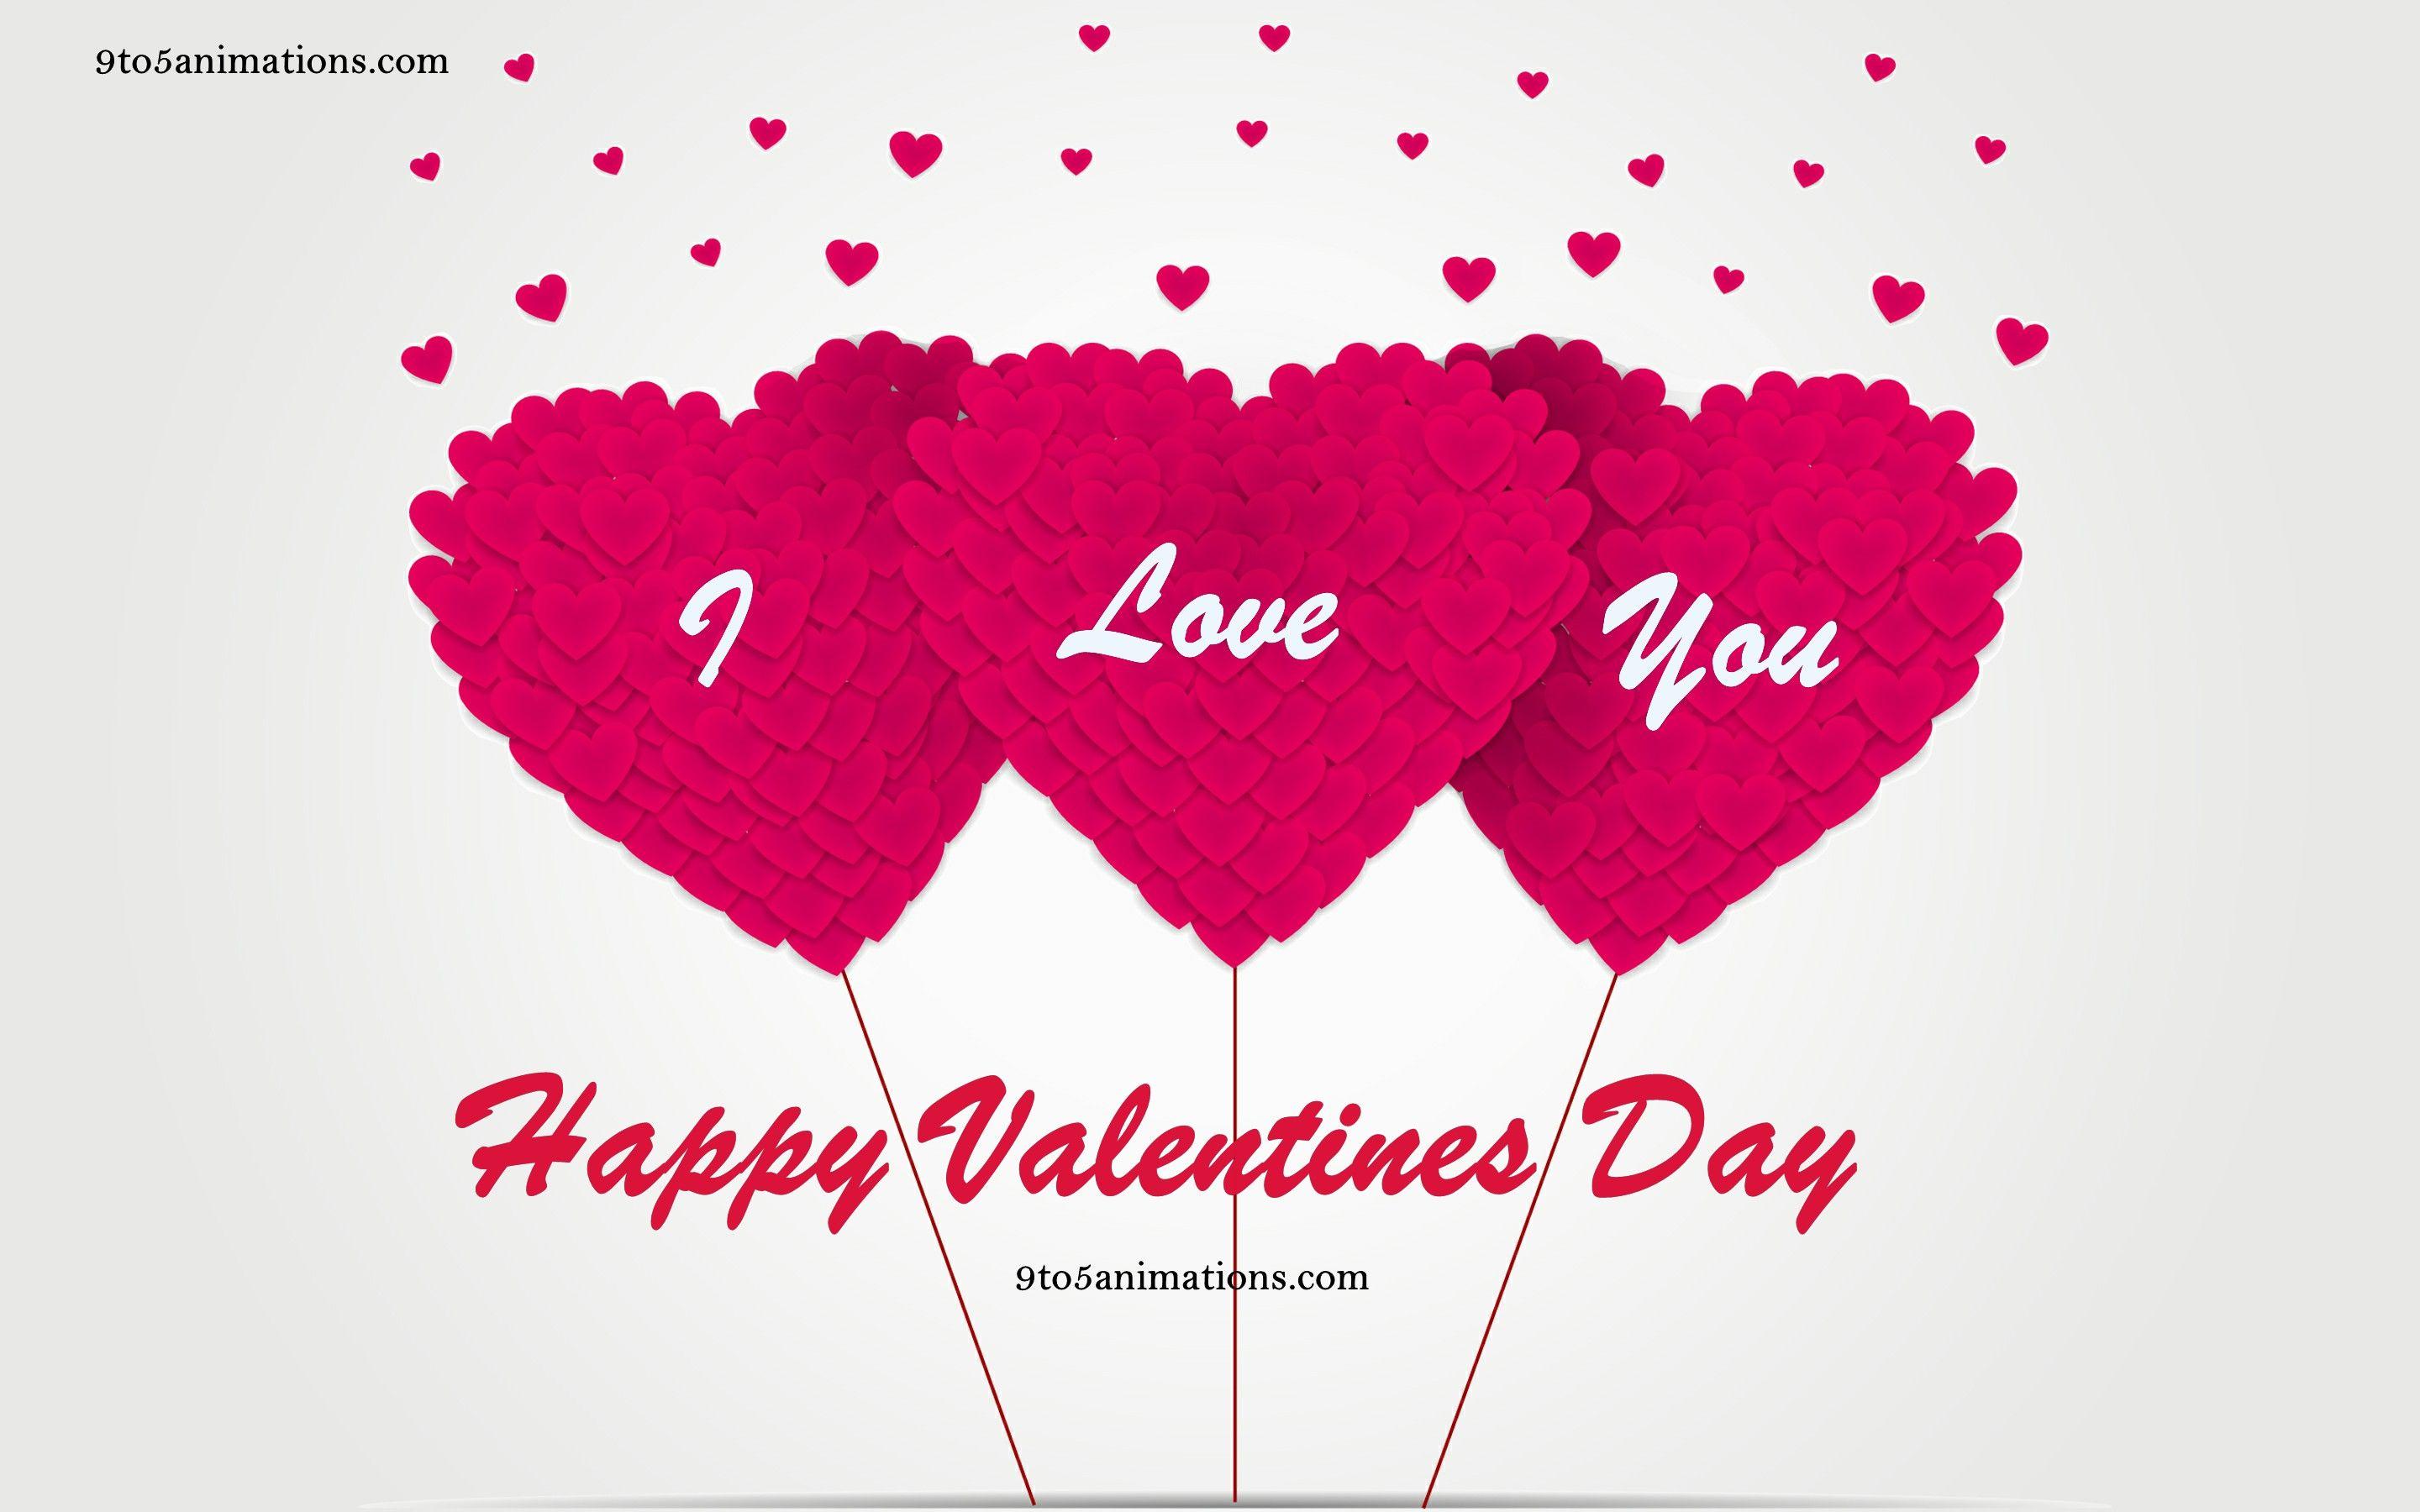 Happy Valentines Day 2018 Love Image. To5Animations.Com